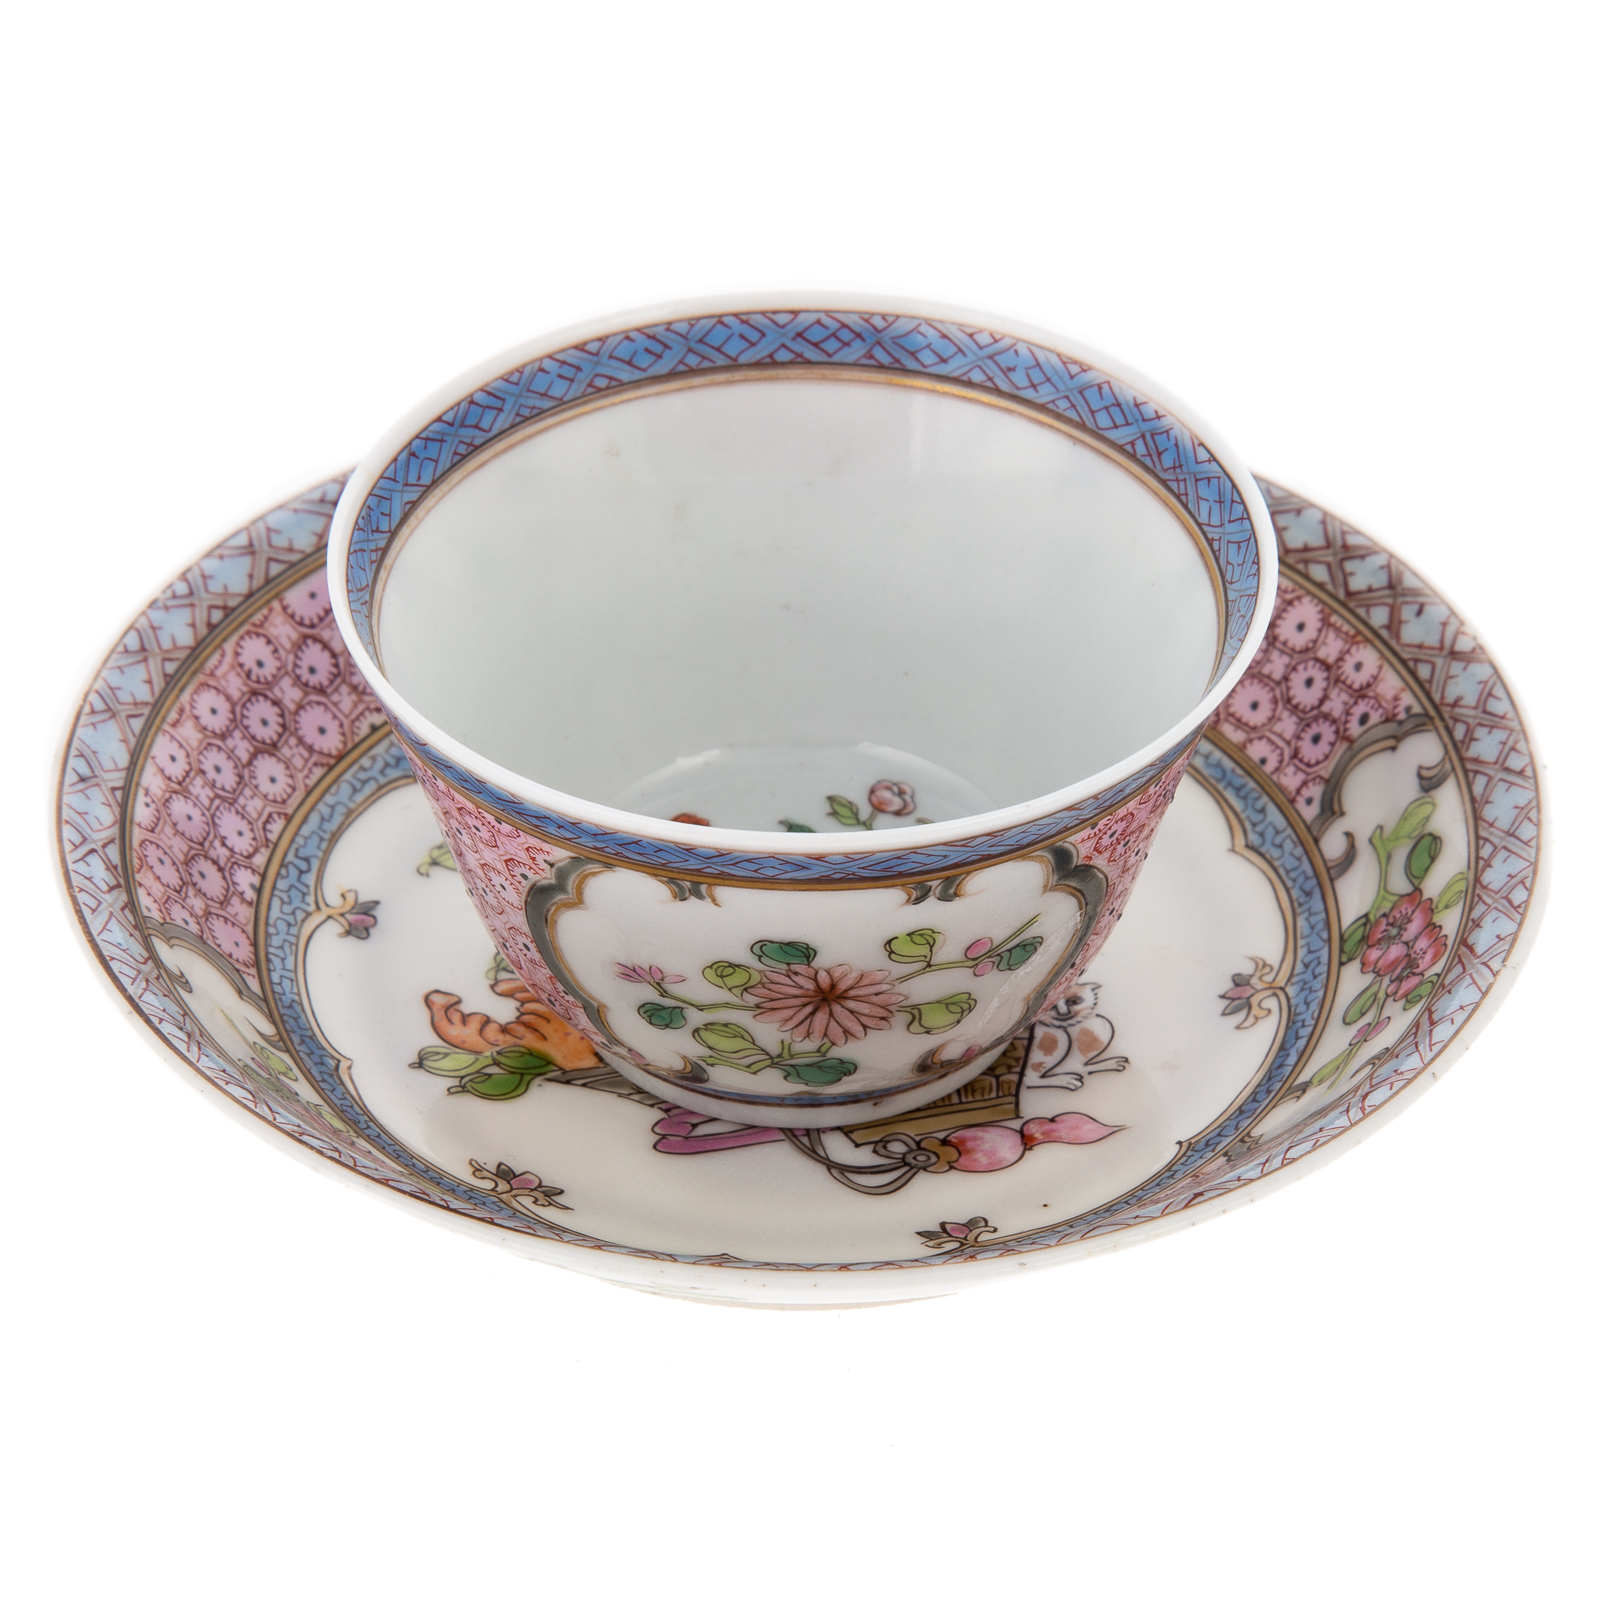 CHINESE EXPORT FAMILLE ROSE CUP SAUCER 338f4e